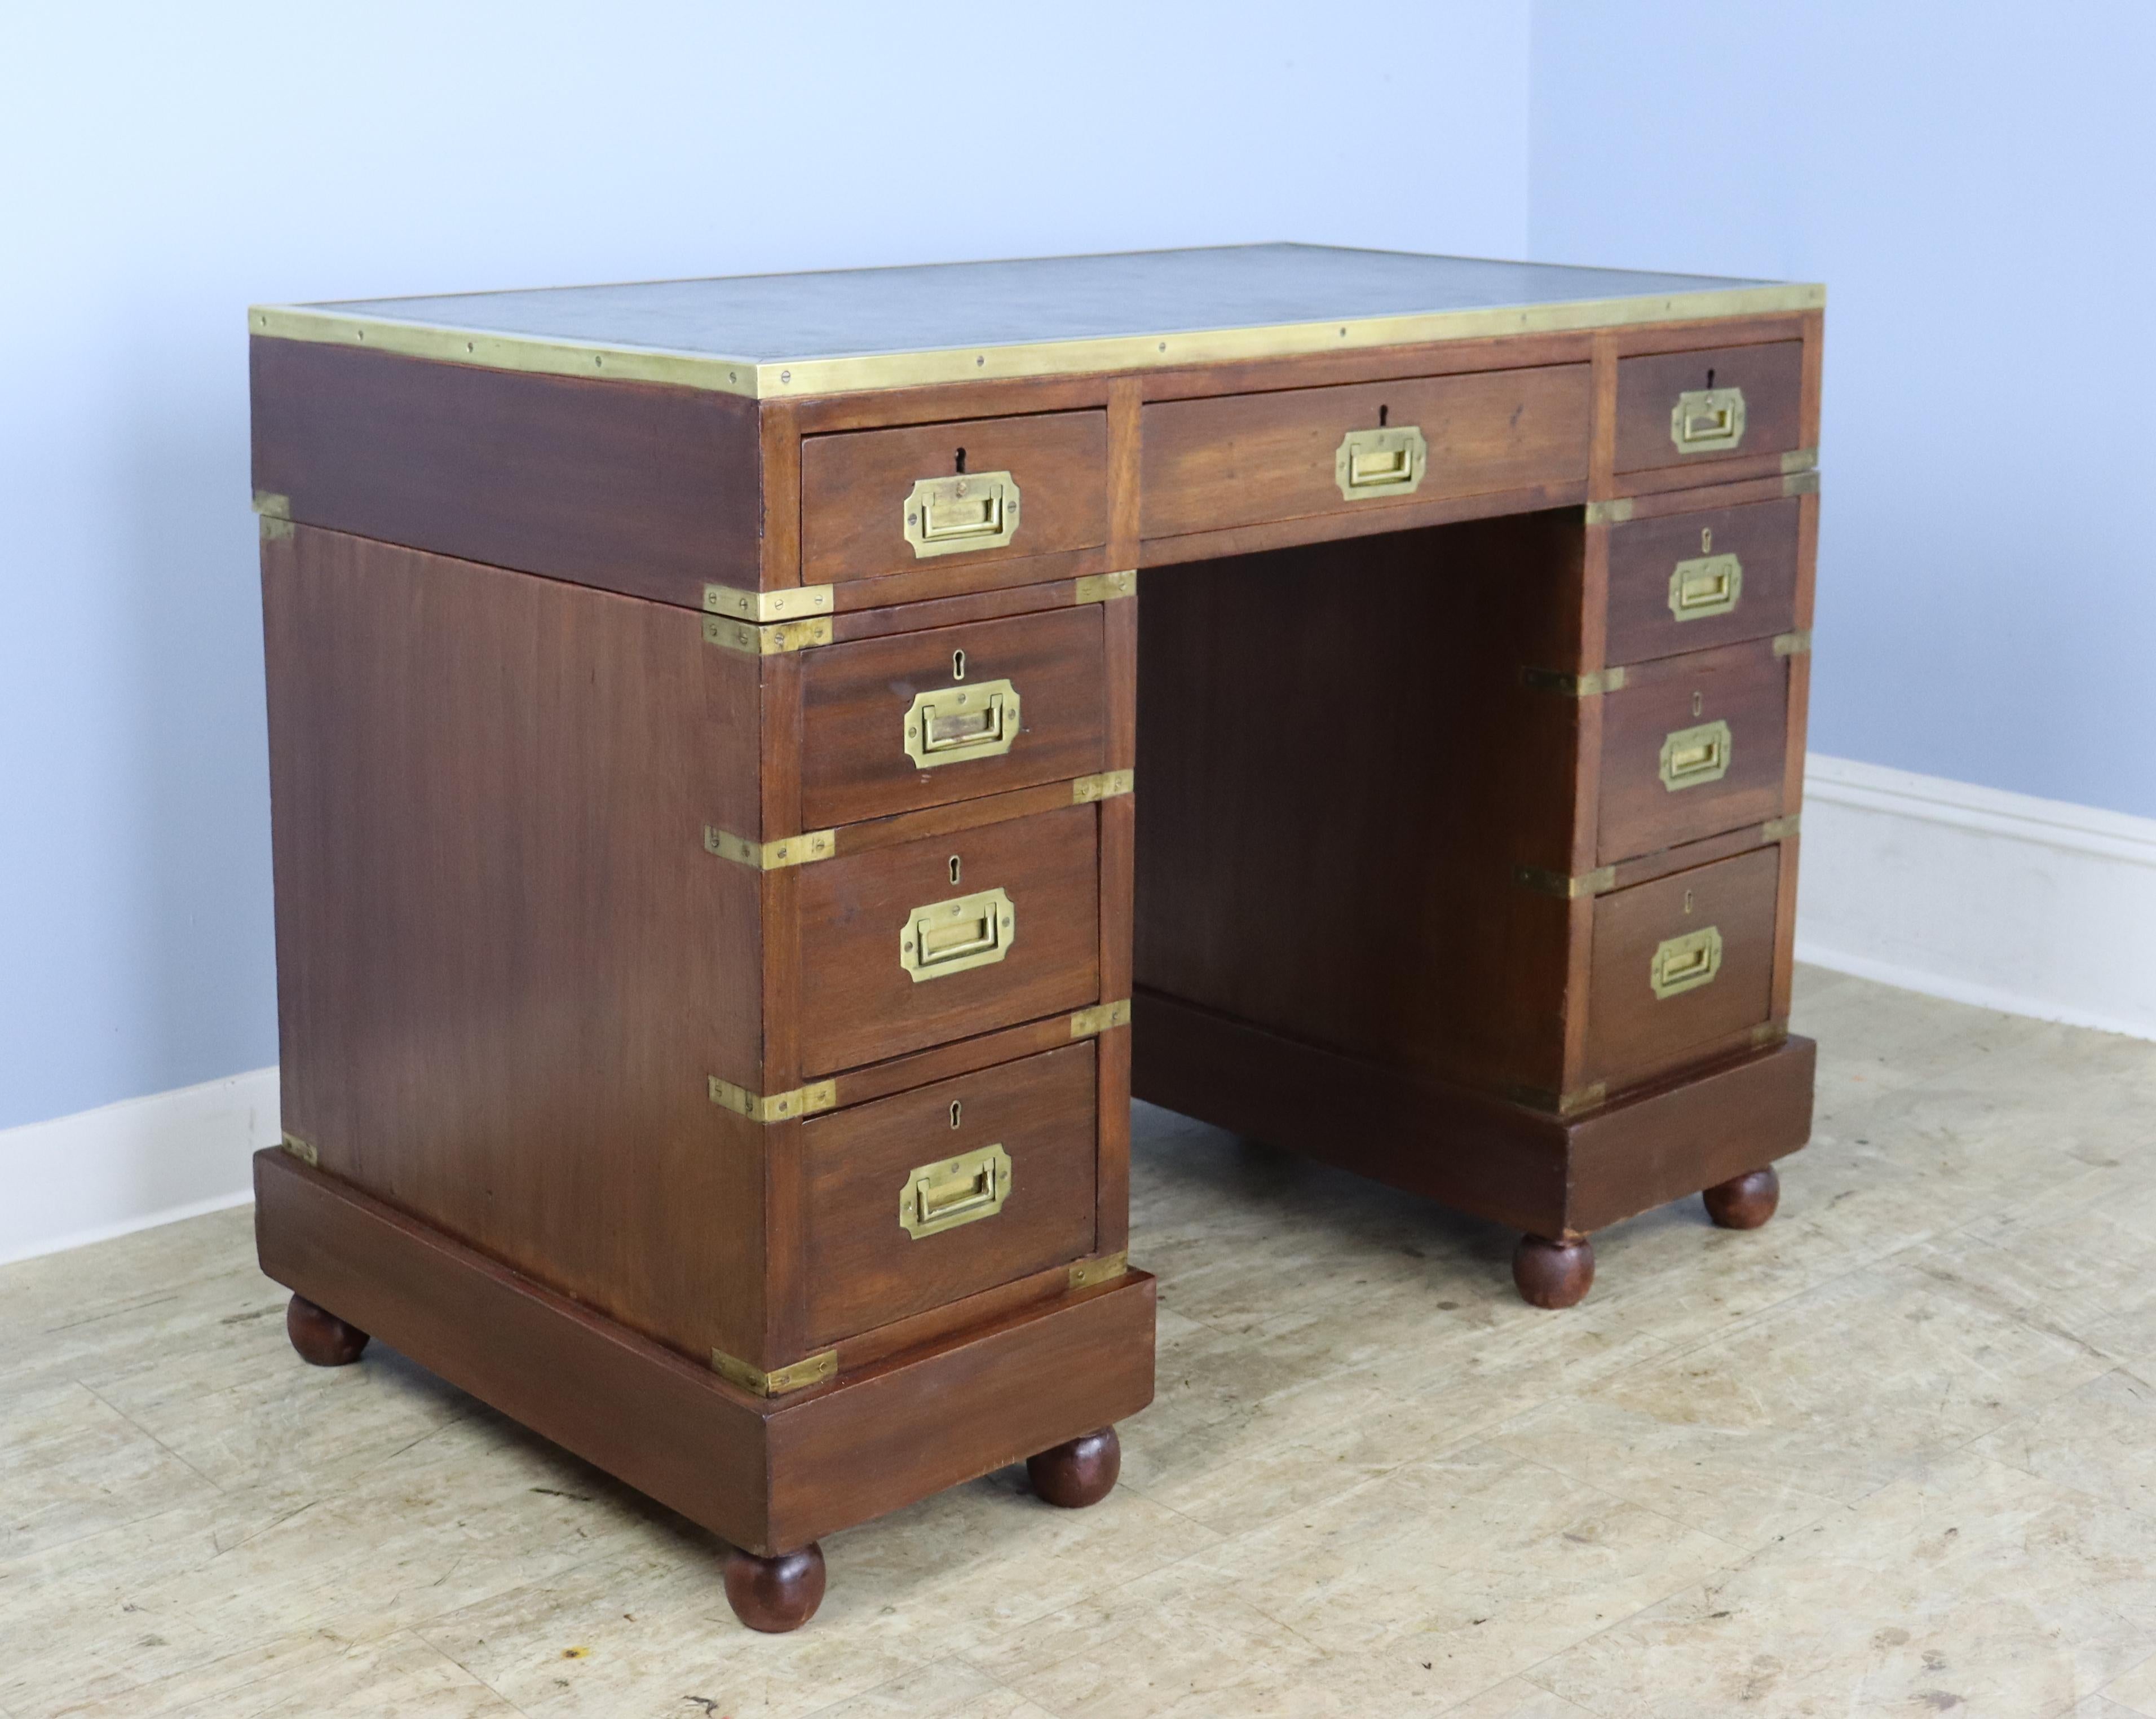 Theres alot to admire about this beautiful original campaign desk. Both the mahogany and the original green embossed leather are in good antique condition, as are the brass accents. The interior of the drawers are clean and the sweet bun feet are an